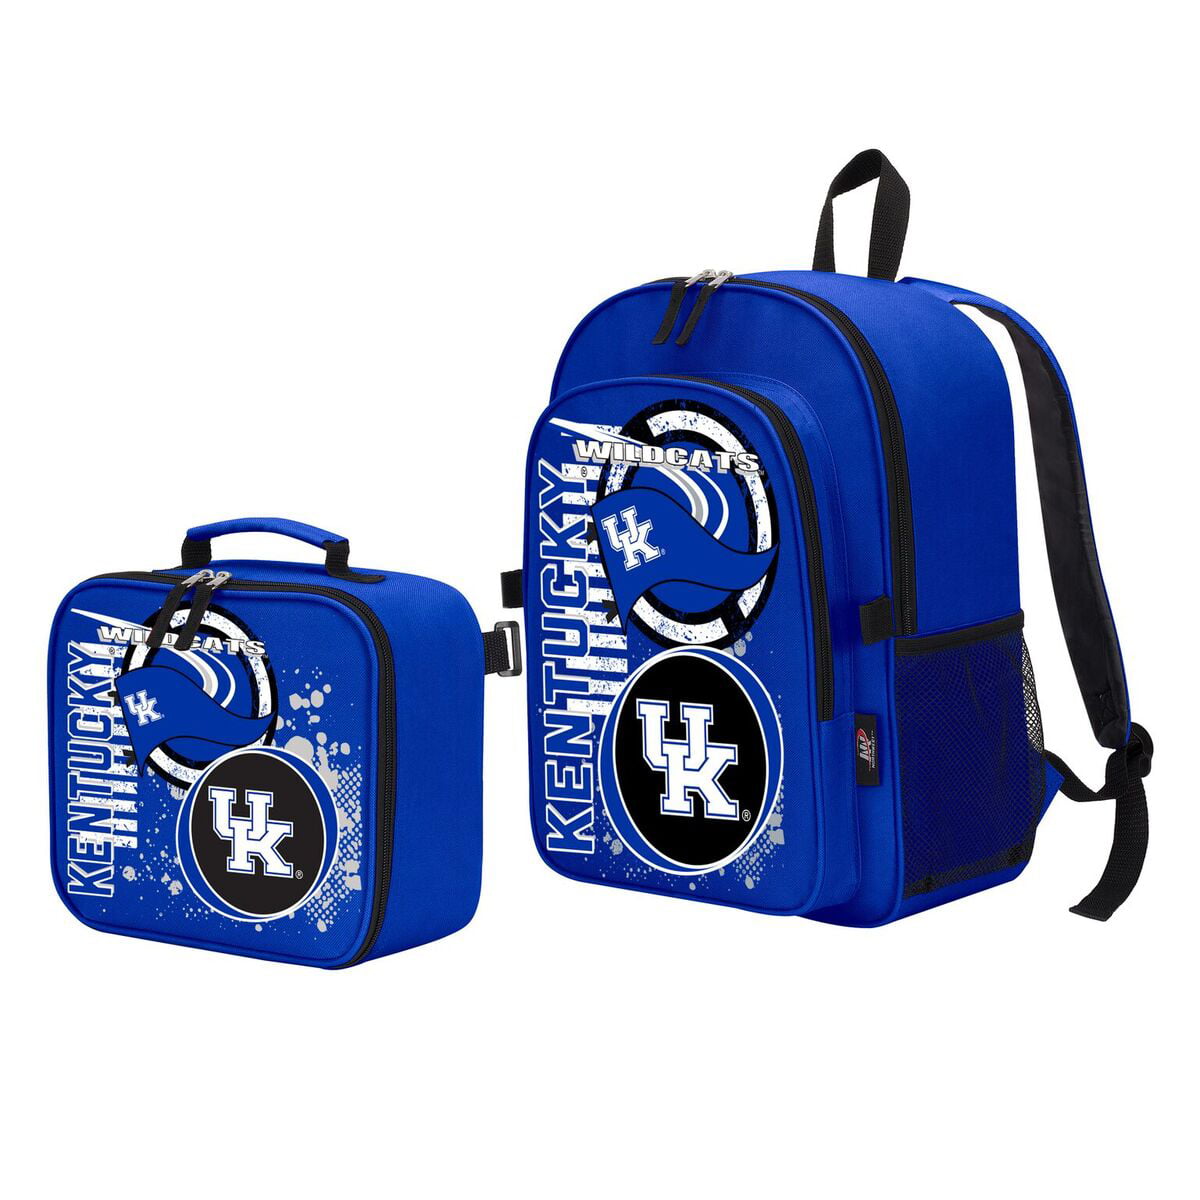 Officially Licensed NCAA Accelerator Lunch Kit Bag Multi Color 10.5 x 8.5 x 4 